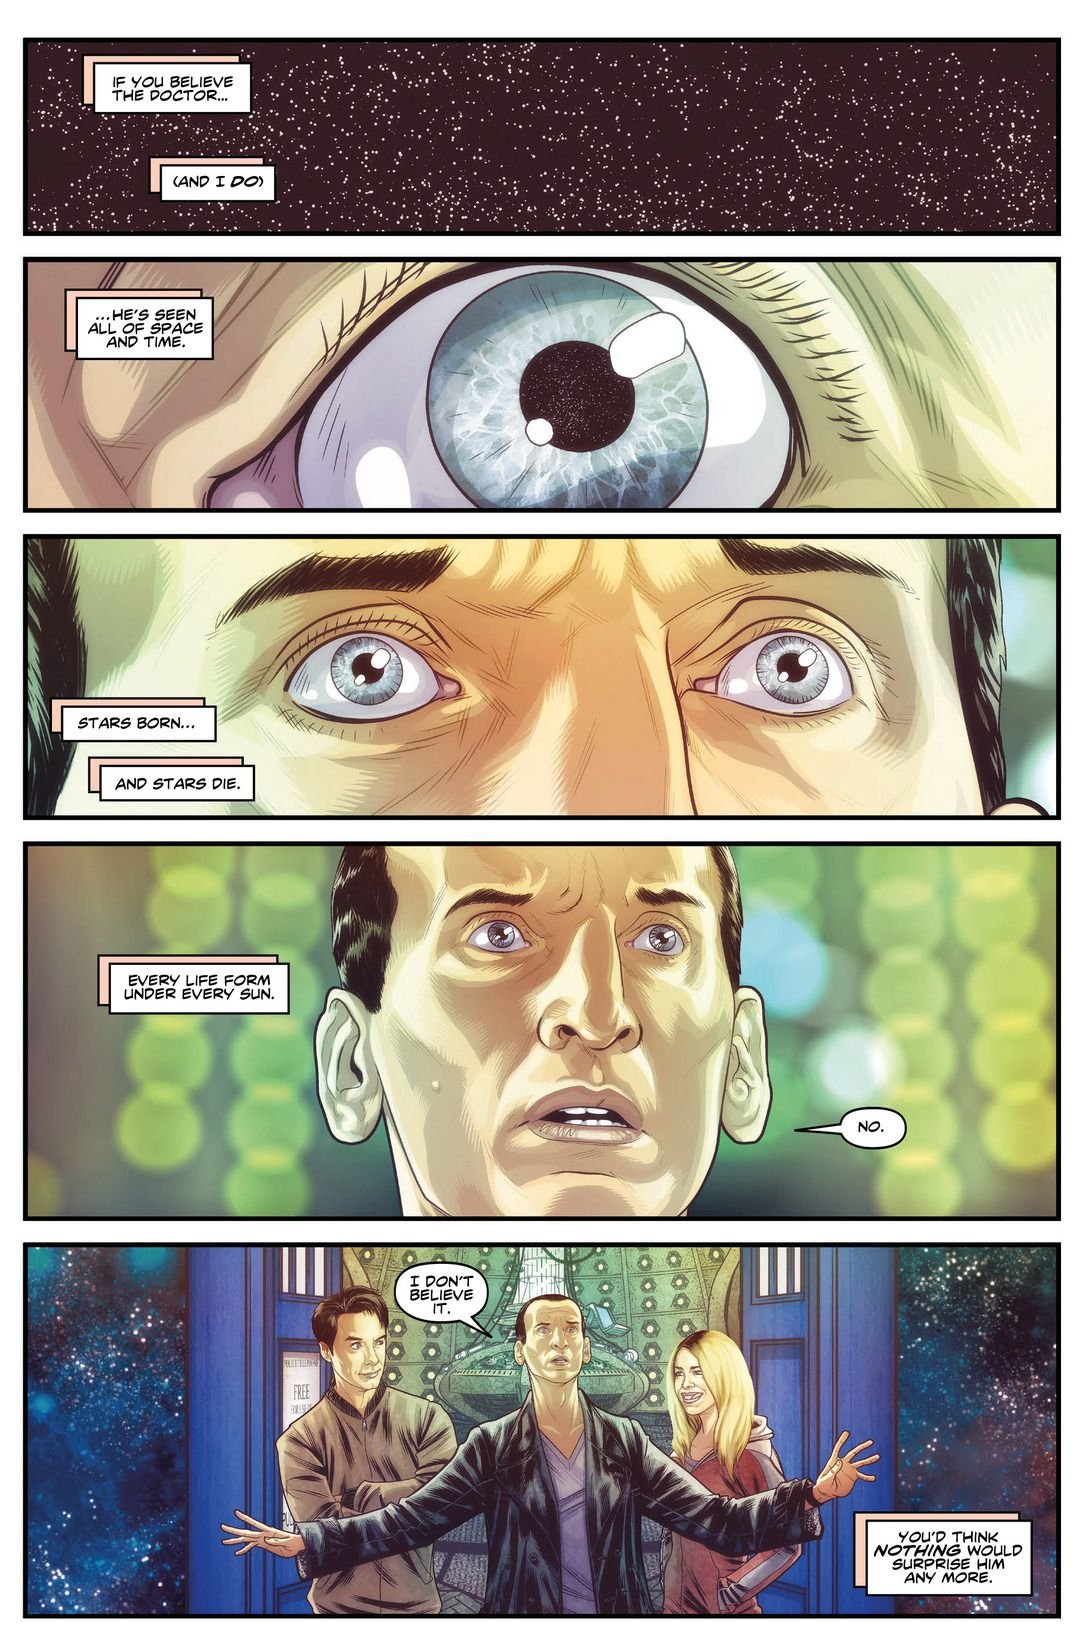 Doctor Who: The Ninth Doctor Collection Vol 1 (Comic) Review 2